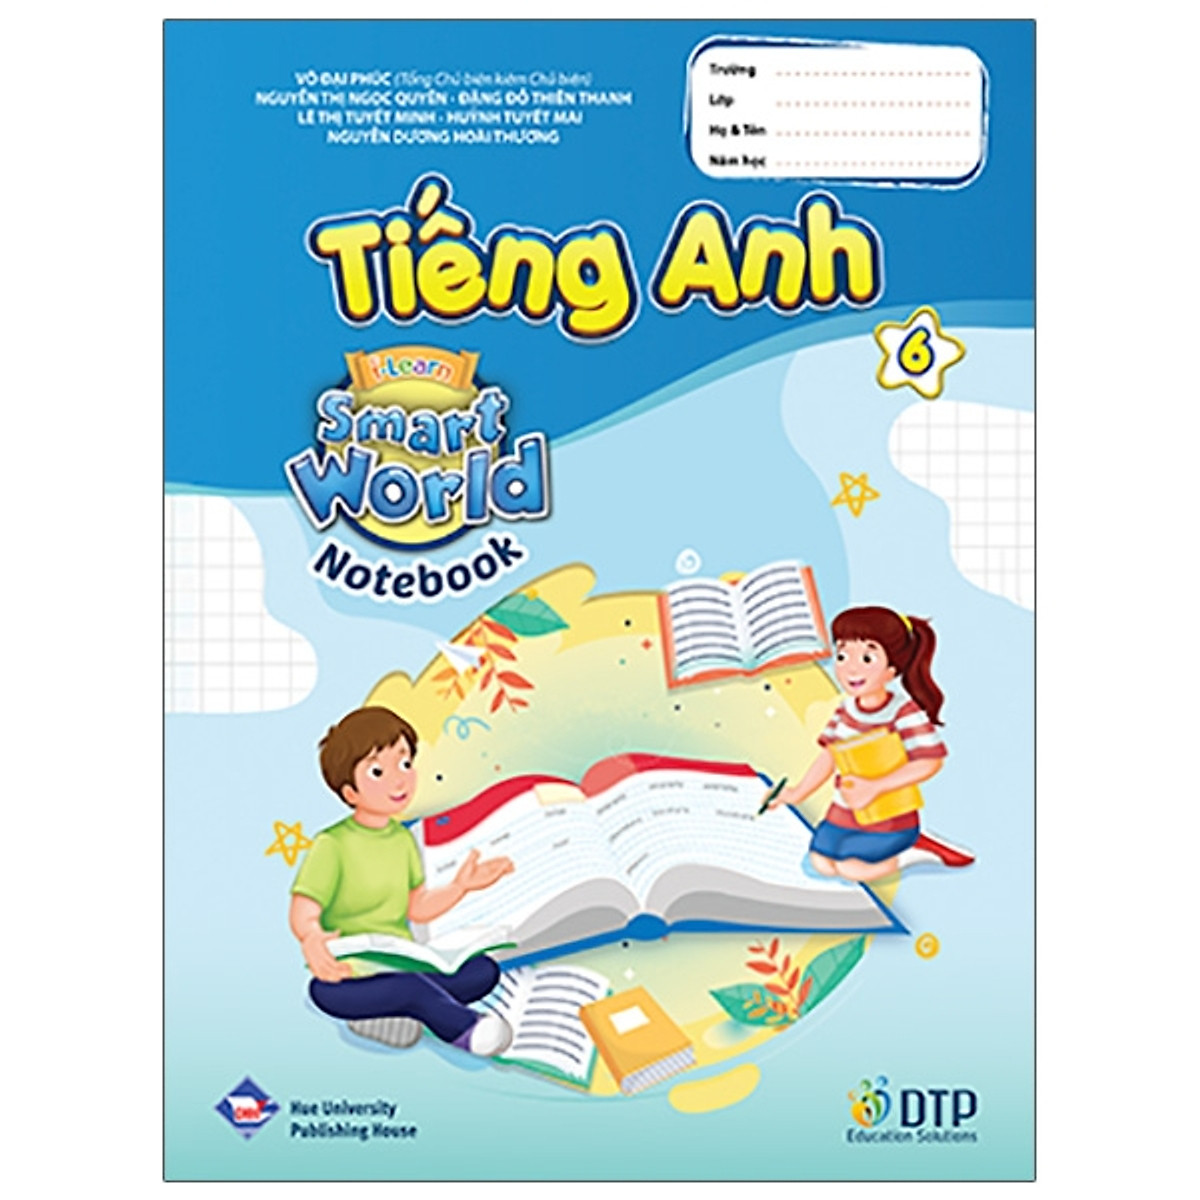 Tiếng Anh 6 I-Learn Smart World - Notebook